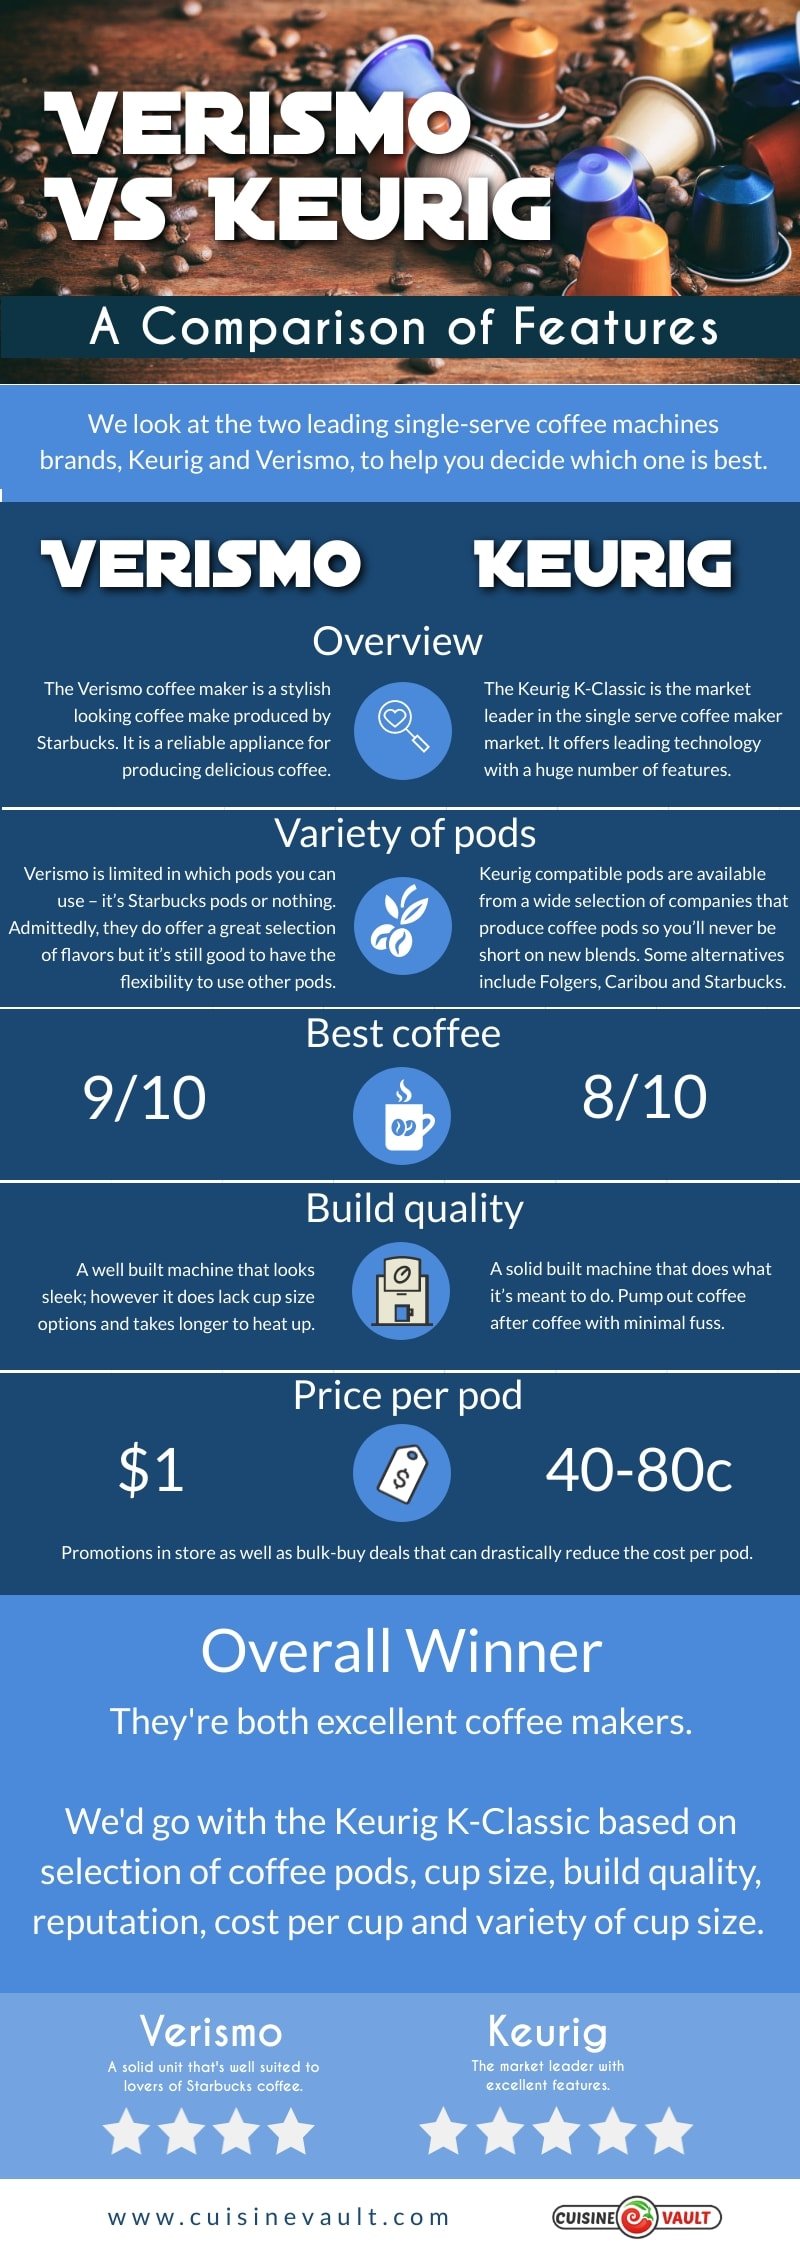 An infographic that compares the Verismo and Keurig pod coffee makers.